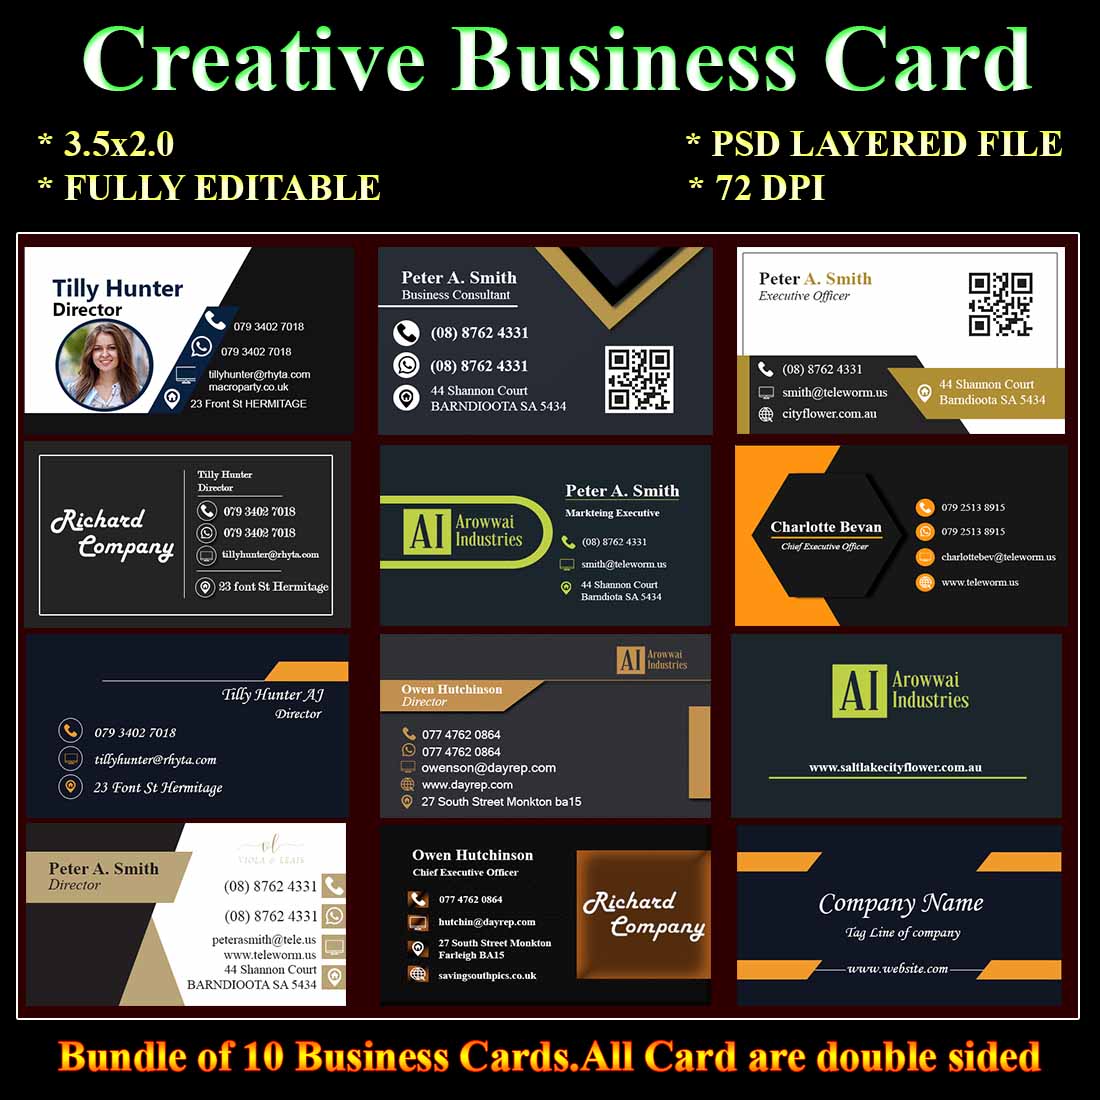 Bundle of 10 Business Card Templates preview image.